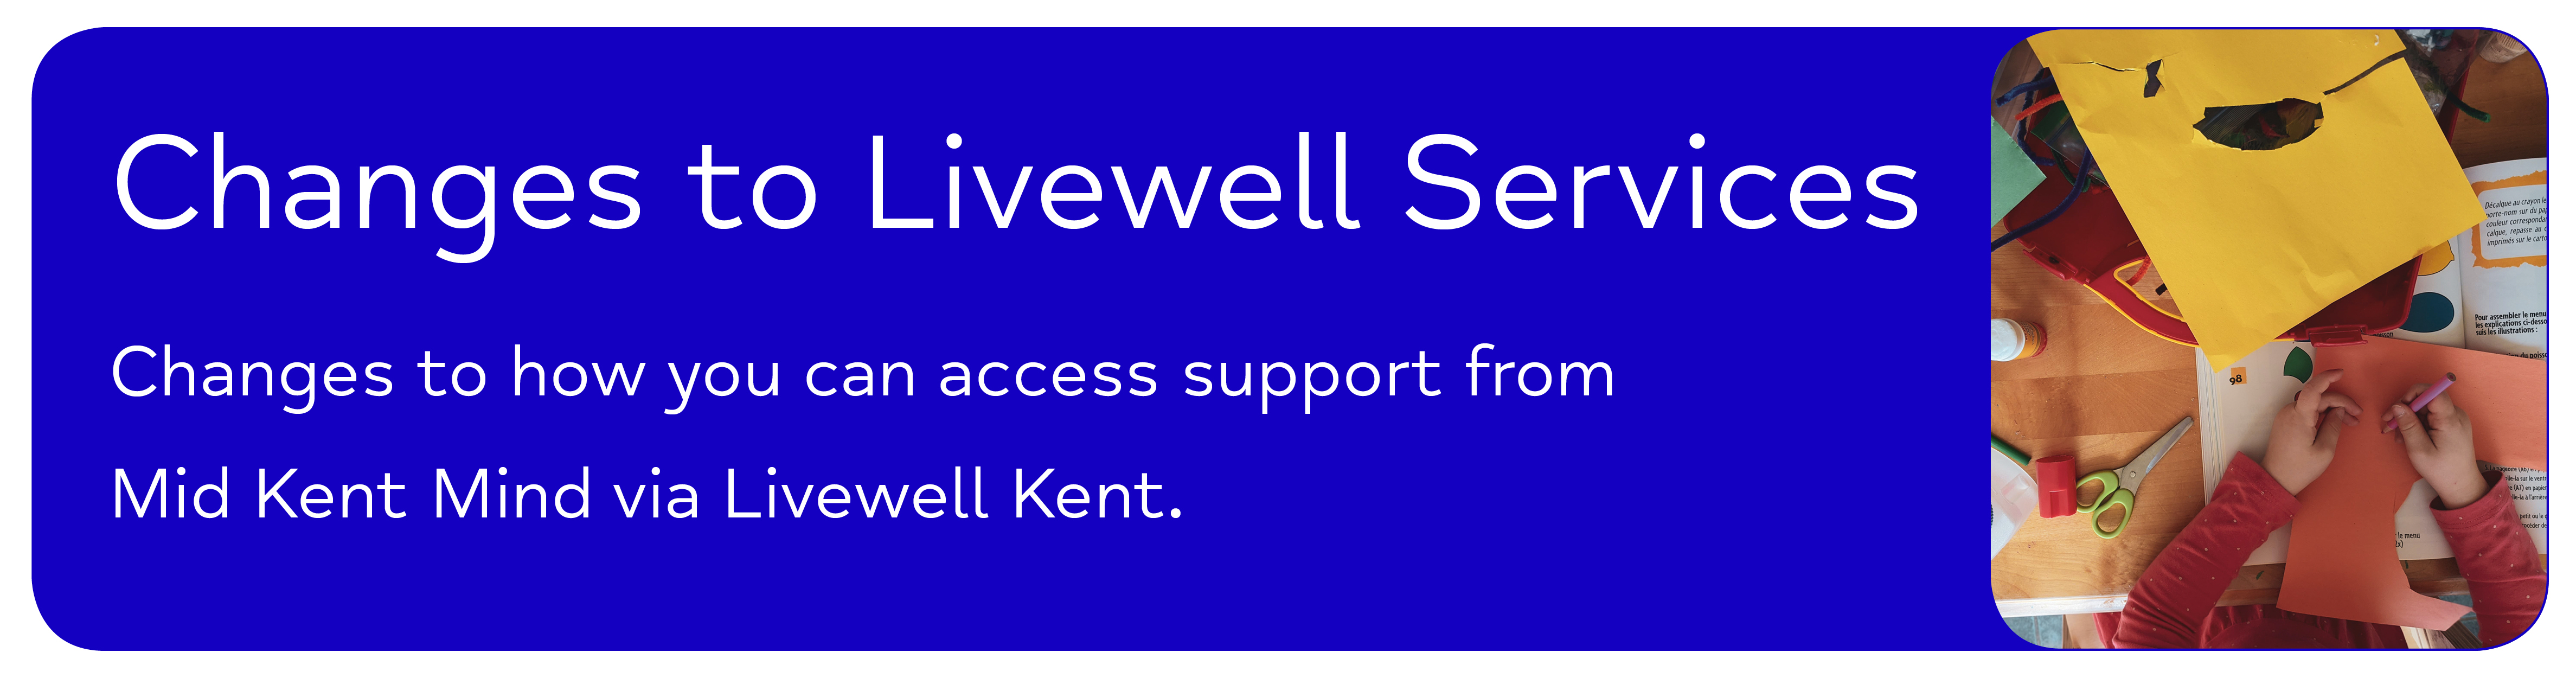 Changes to Livewell Services - Changes to how you can access support from Mid Kent Mind via Livewell Kent.